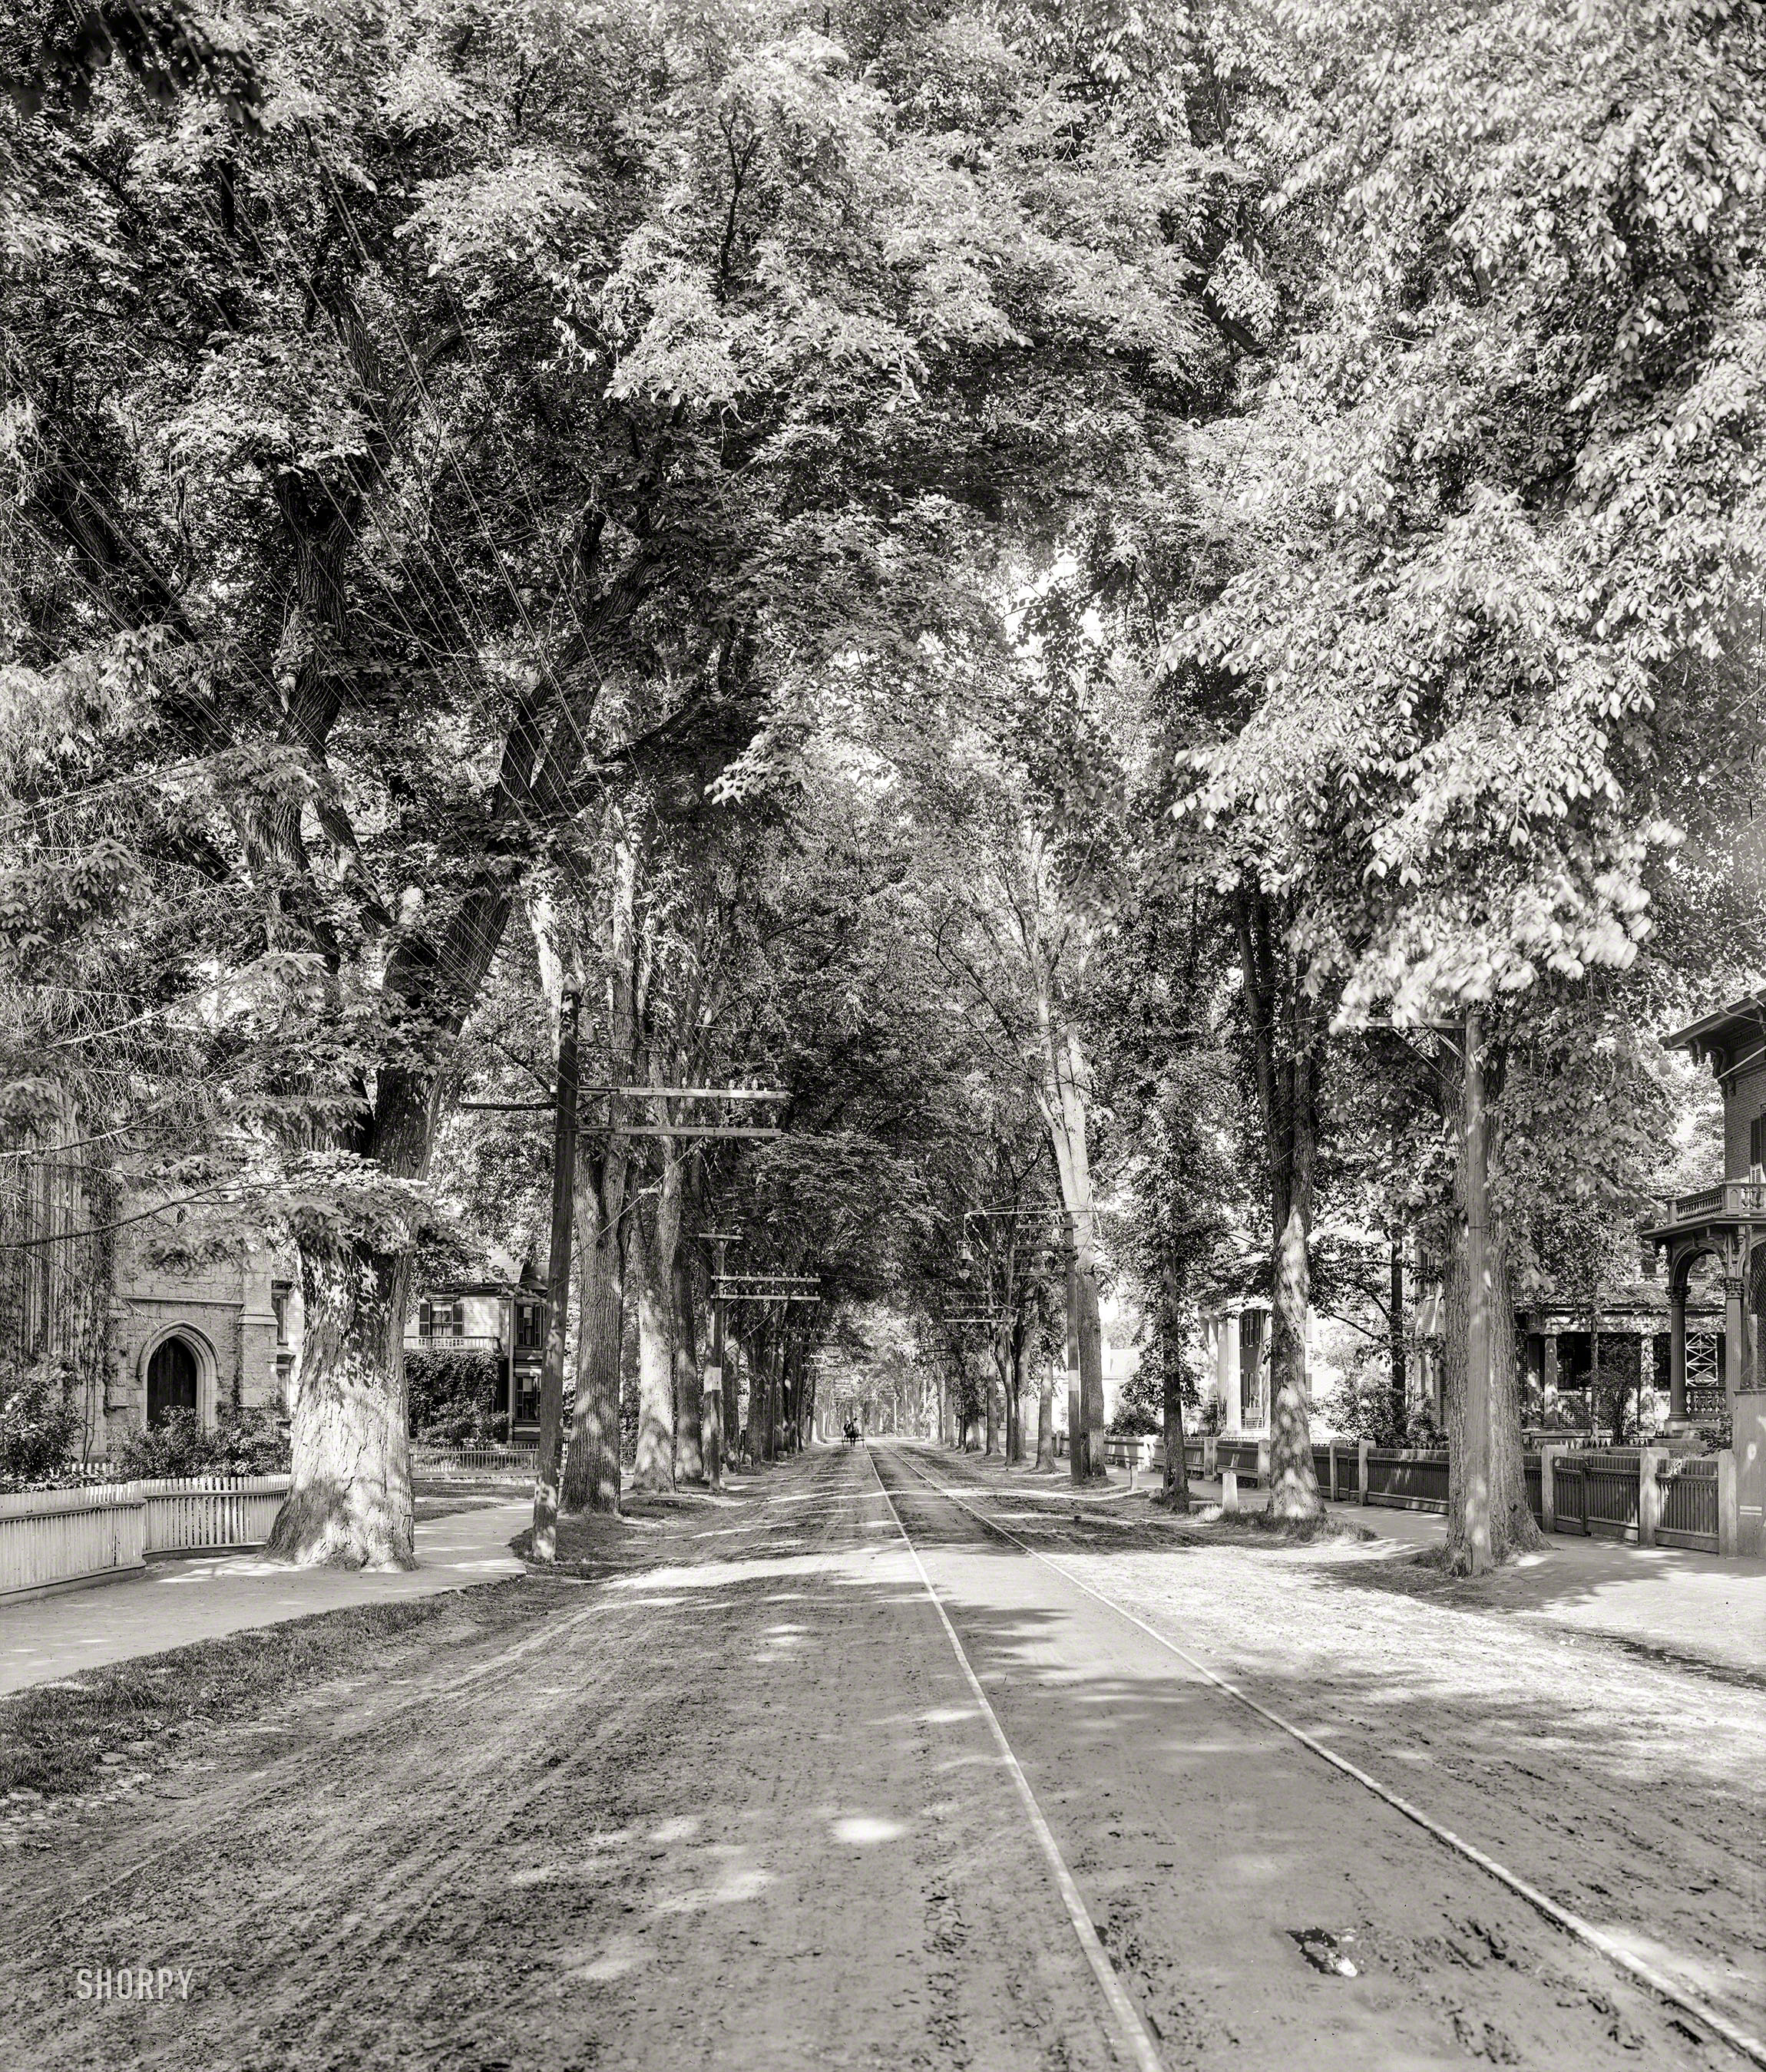 Keene, New Hampshire, circa 1905. "West Street." 8x10 inch dry plate glass negative, Detroit Publishing Company. View full size.